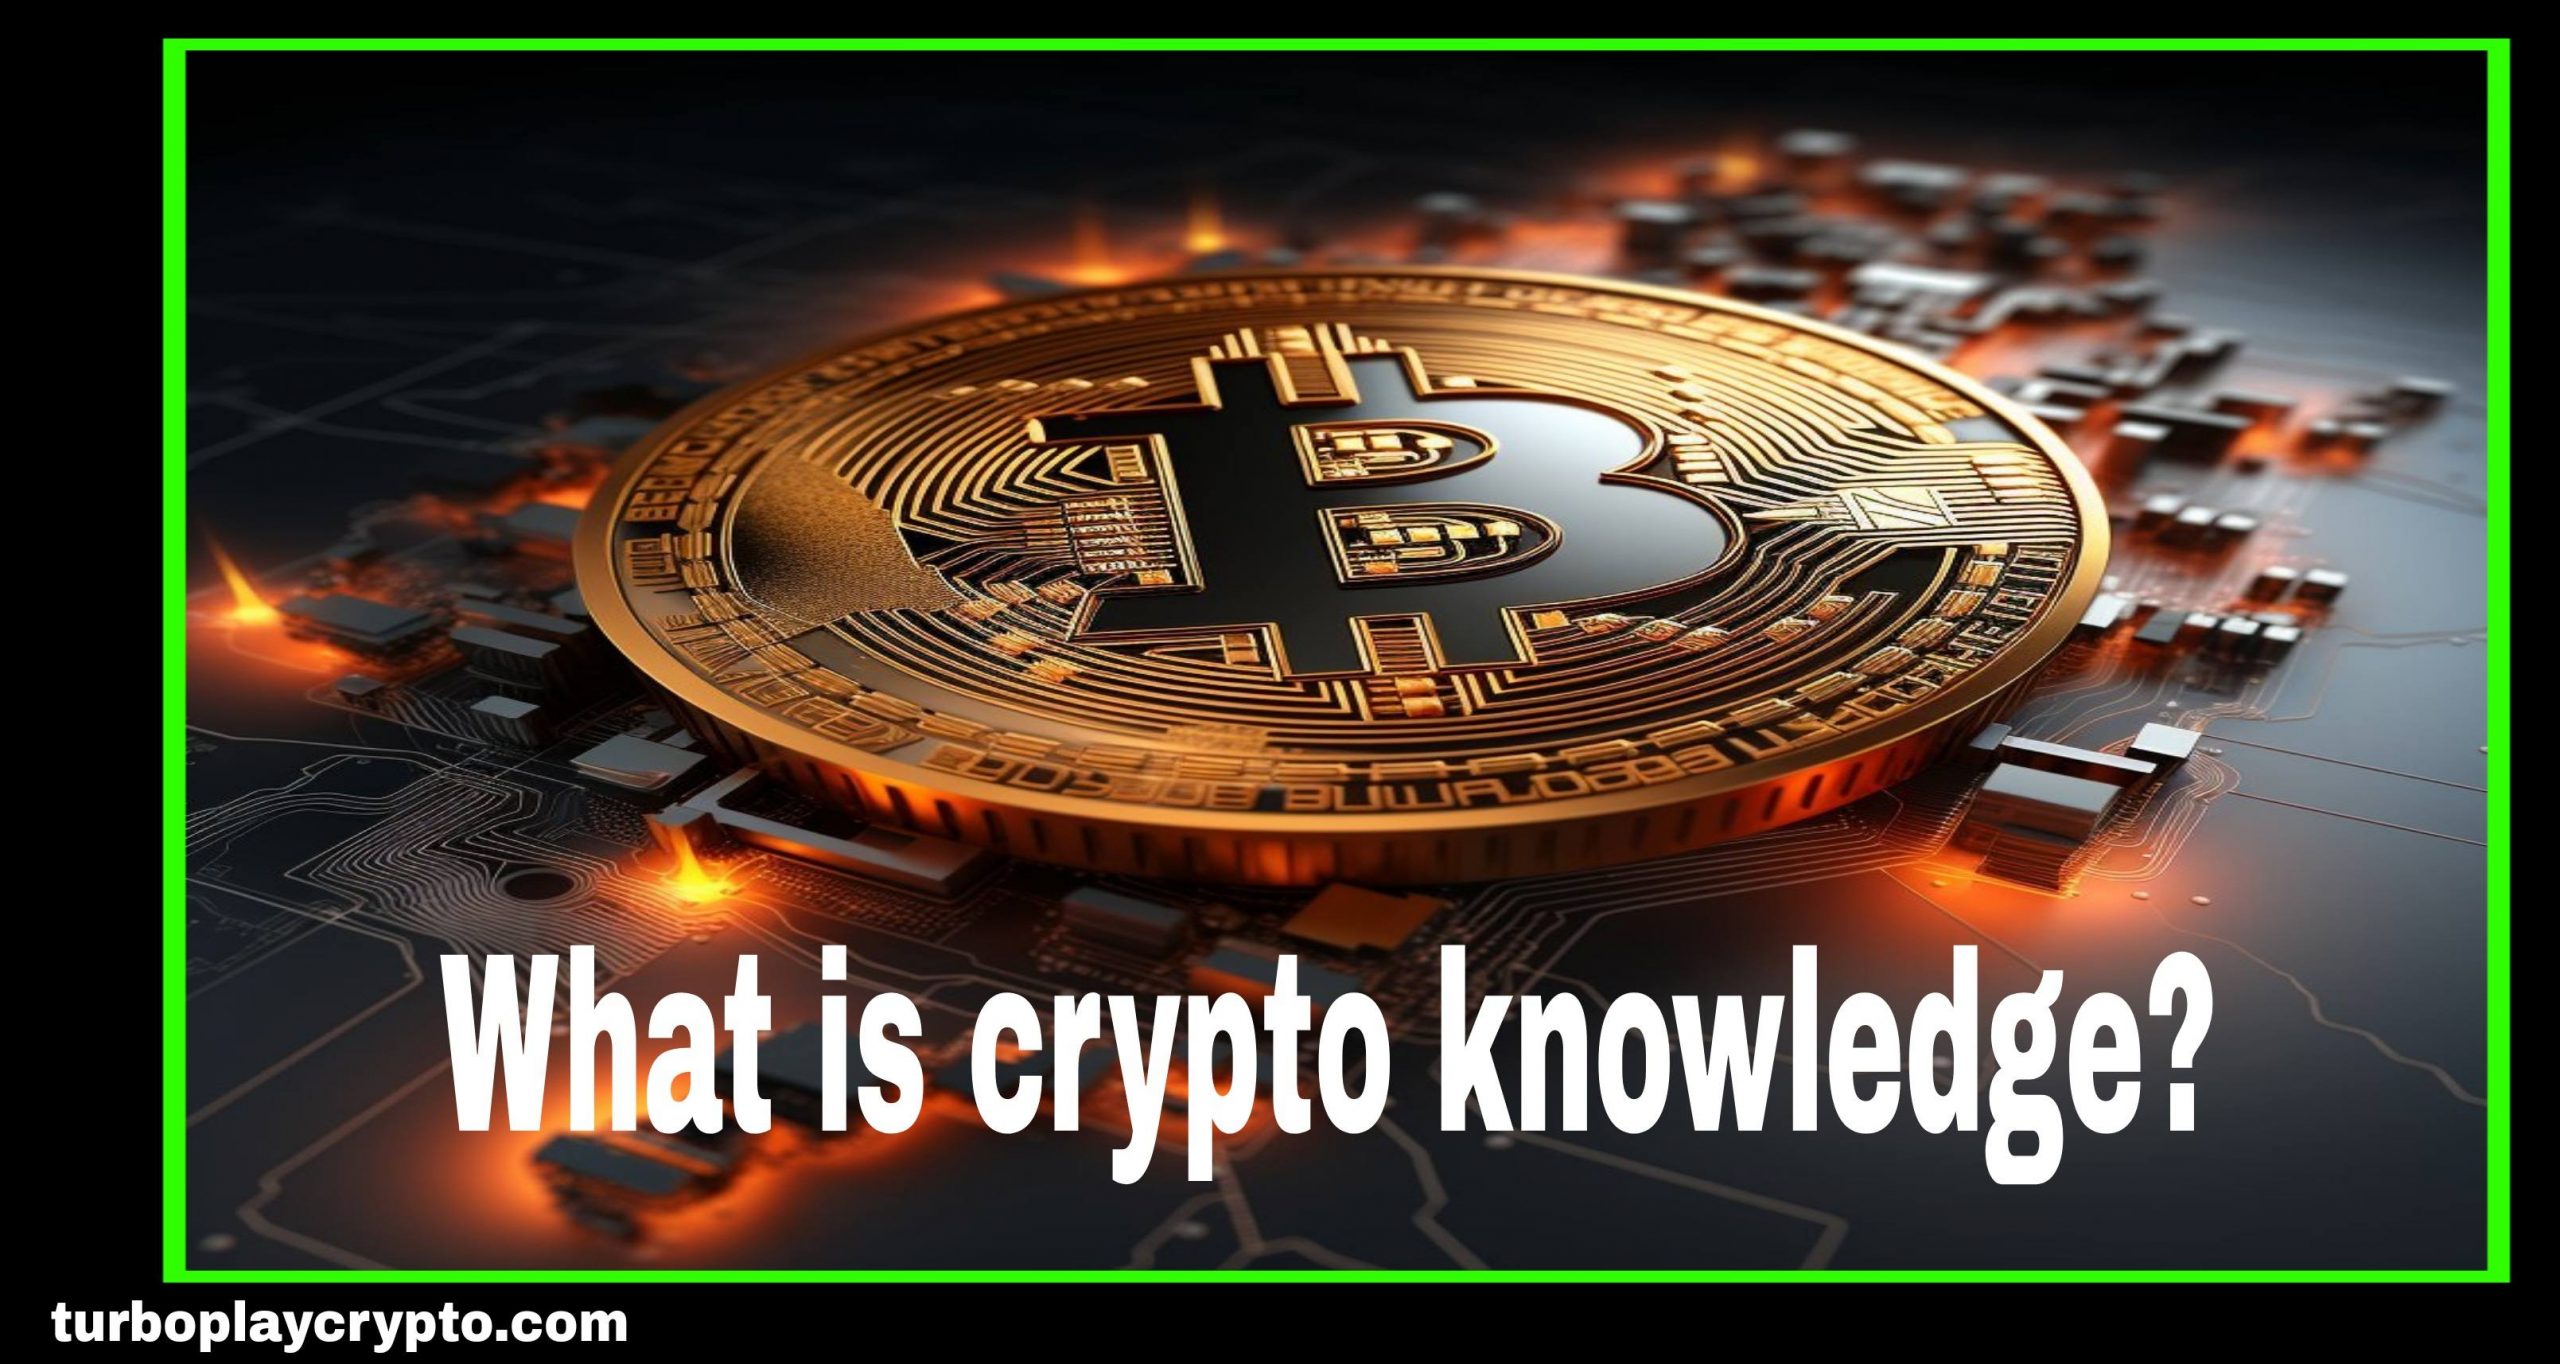 What is Crypto's knowledge?